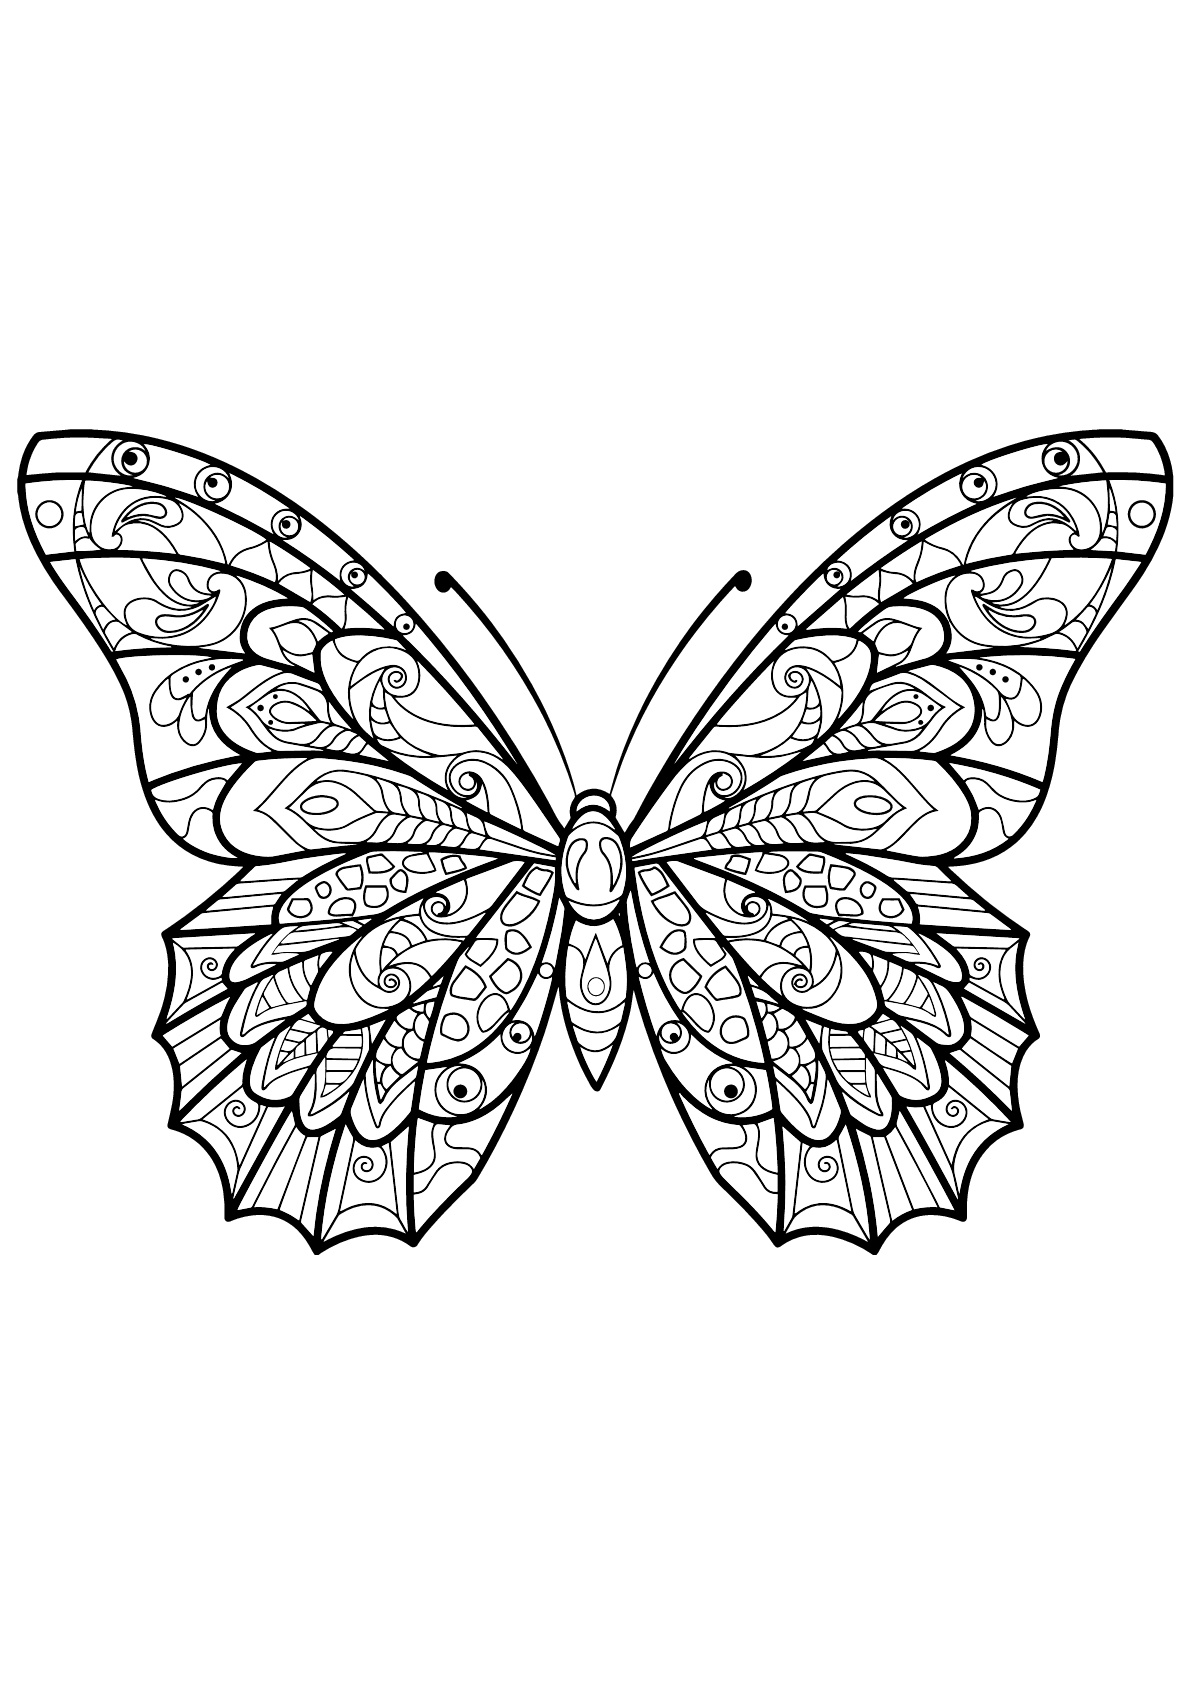 Butterfly coloring page with beautiful designs - 3